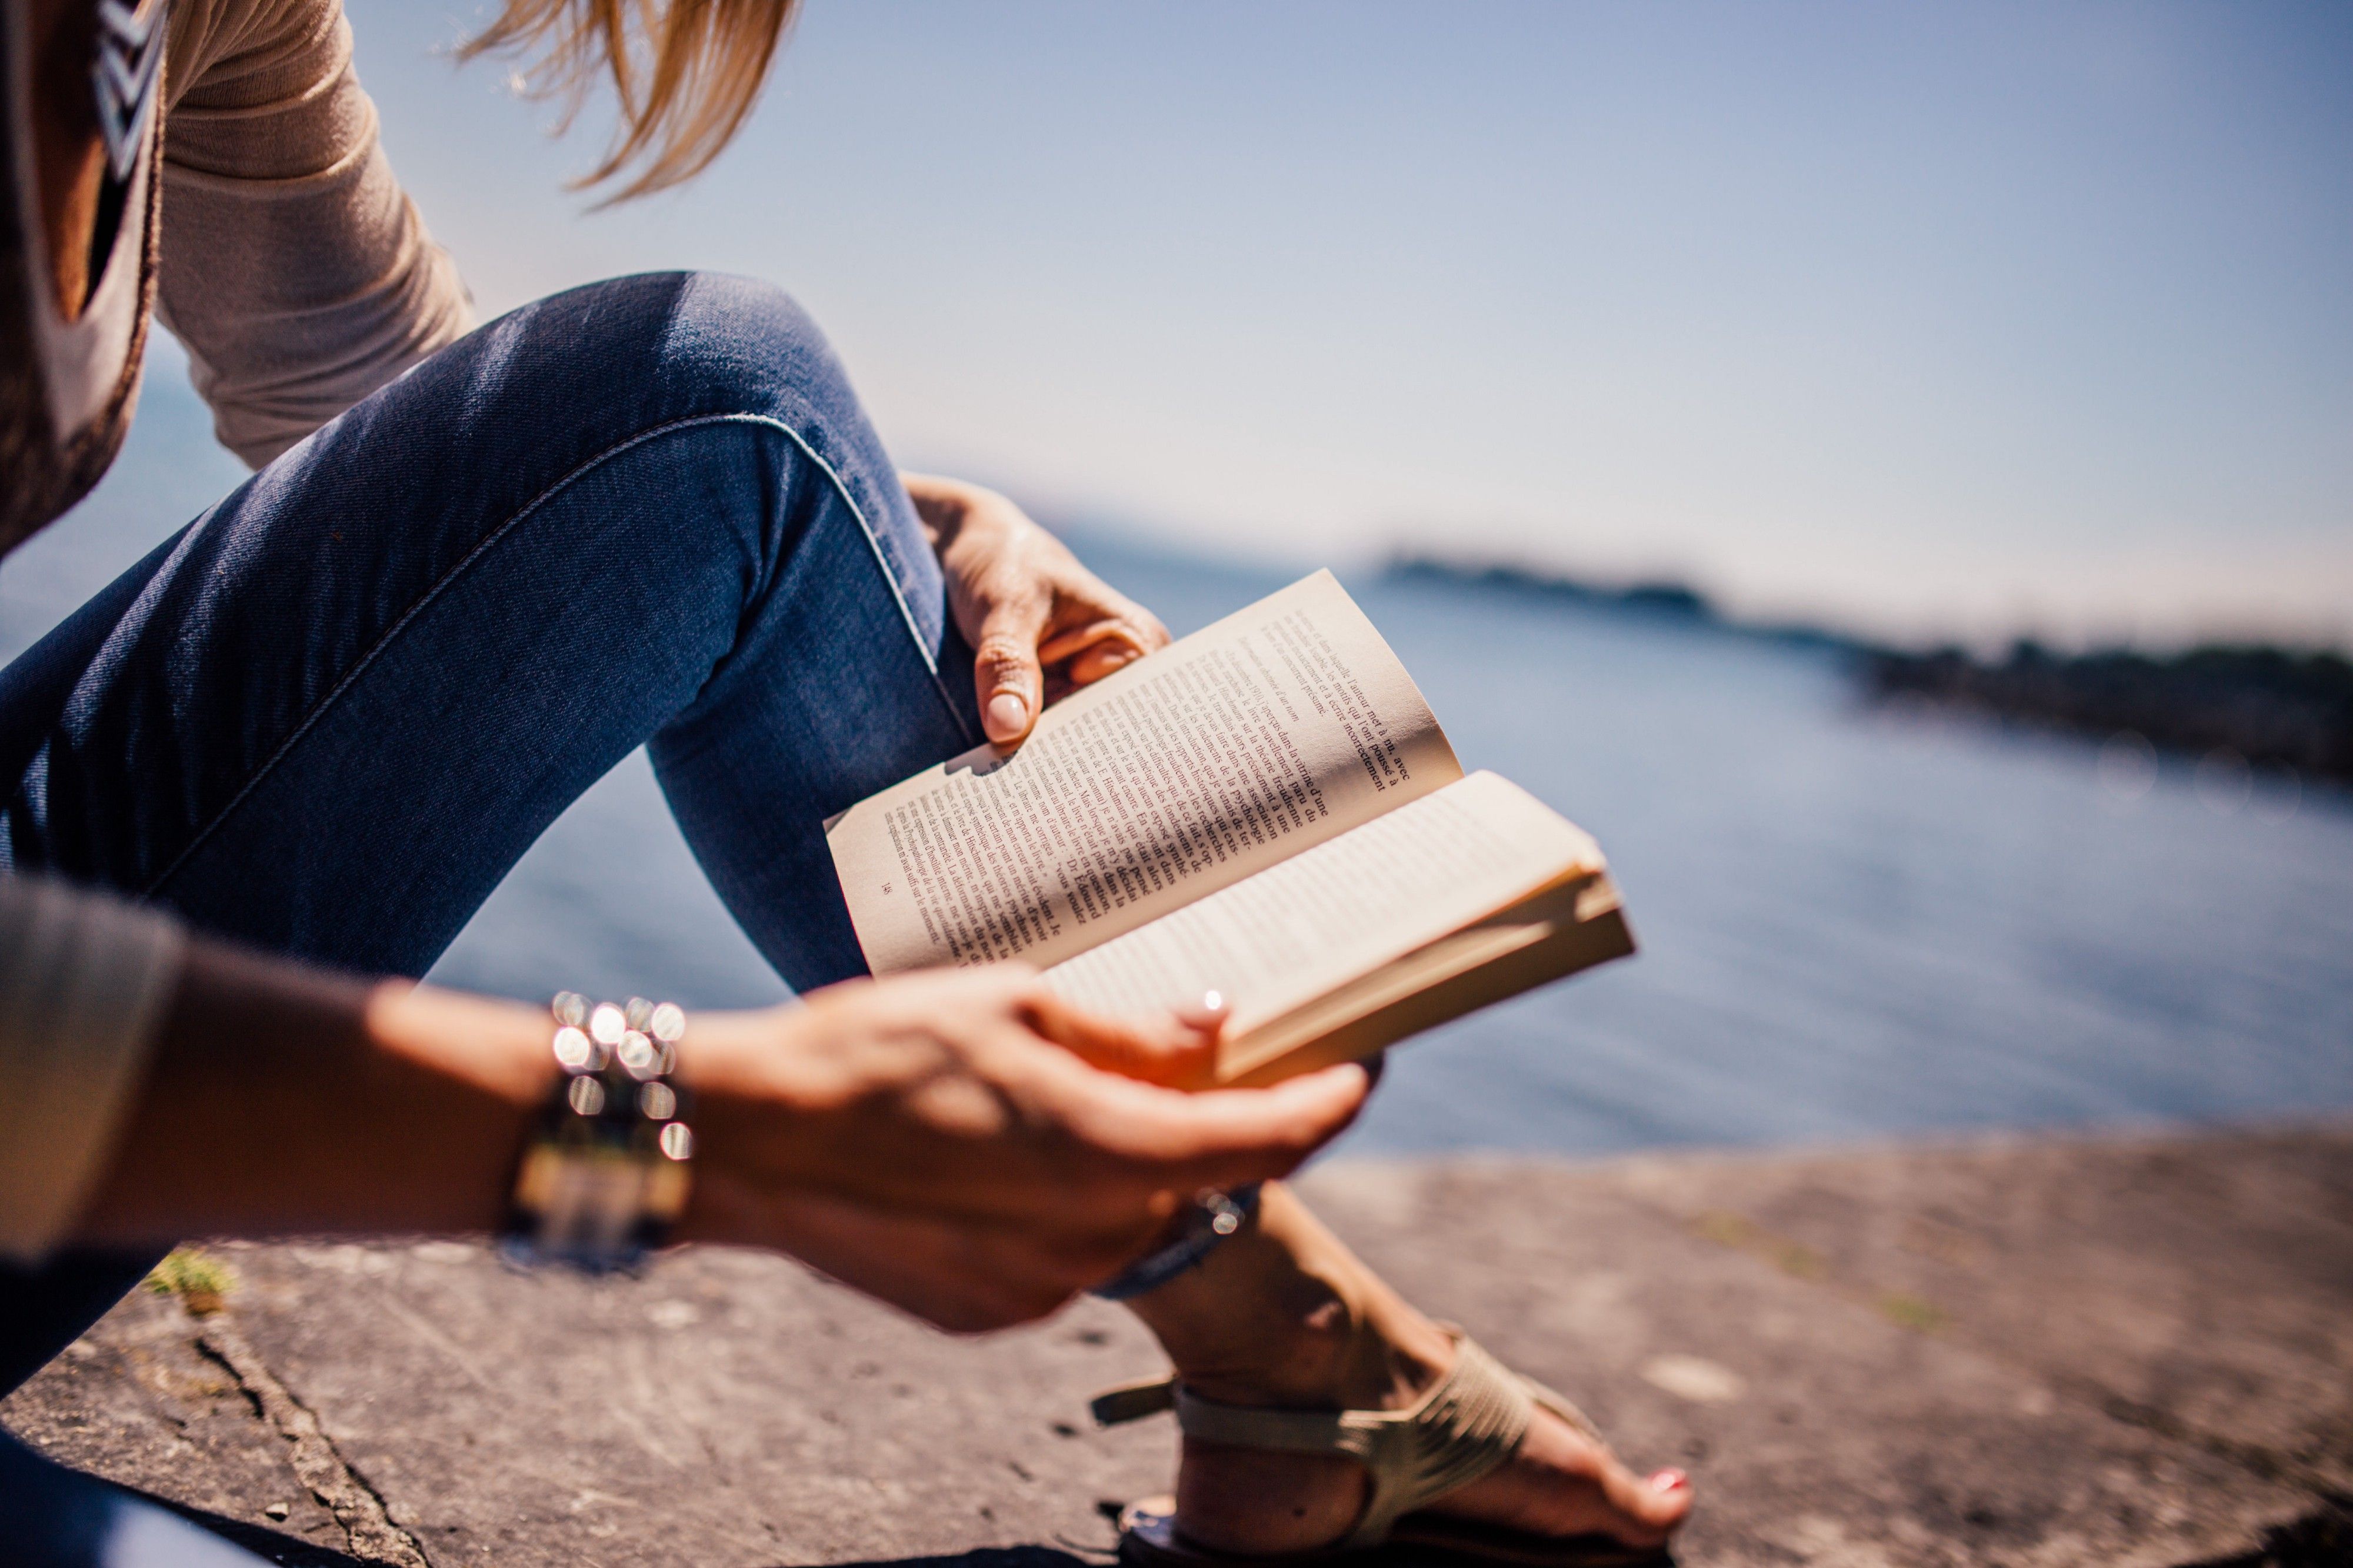 10 pages a day = 3,650 pages/year = 15 books/year. That is the power of habit. | image by Negative Space on pexels